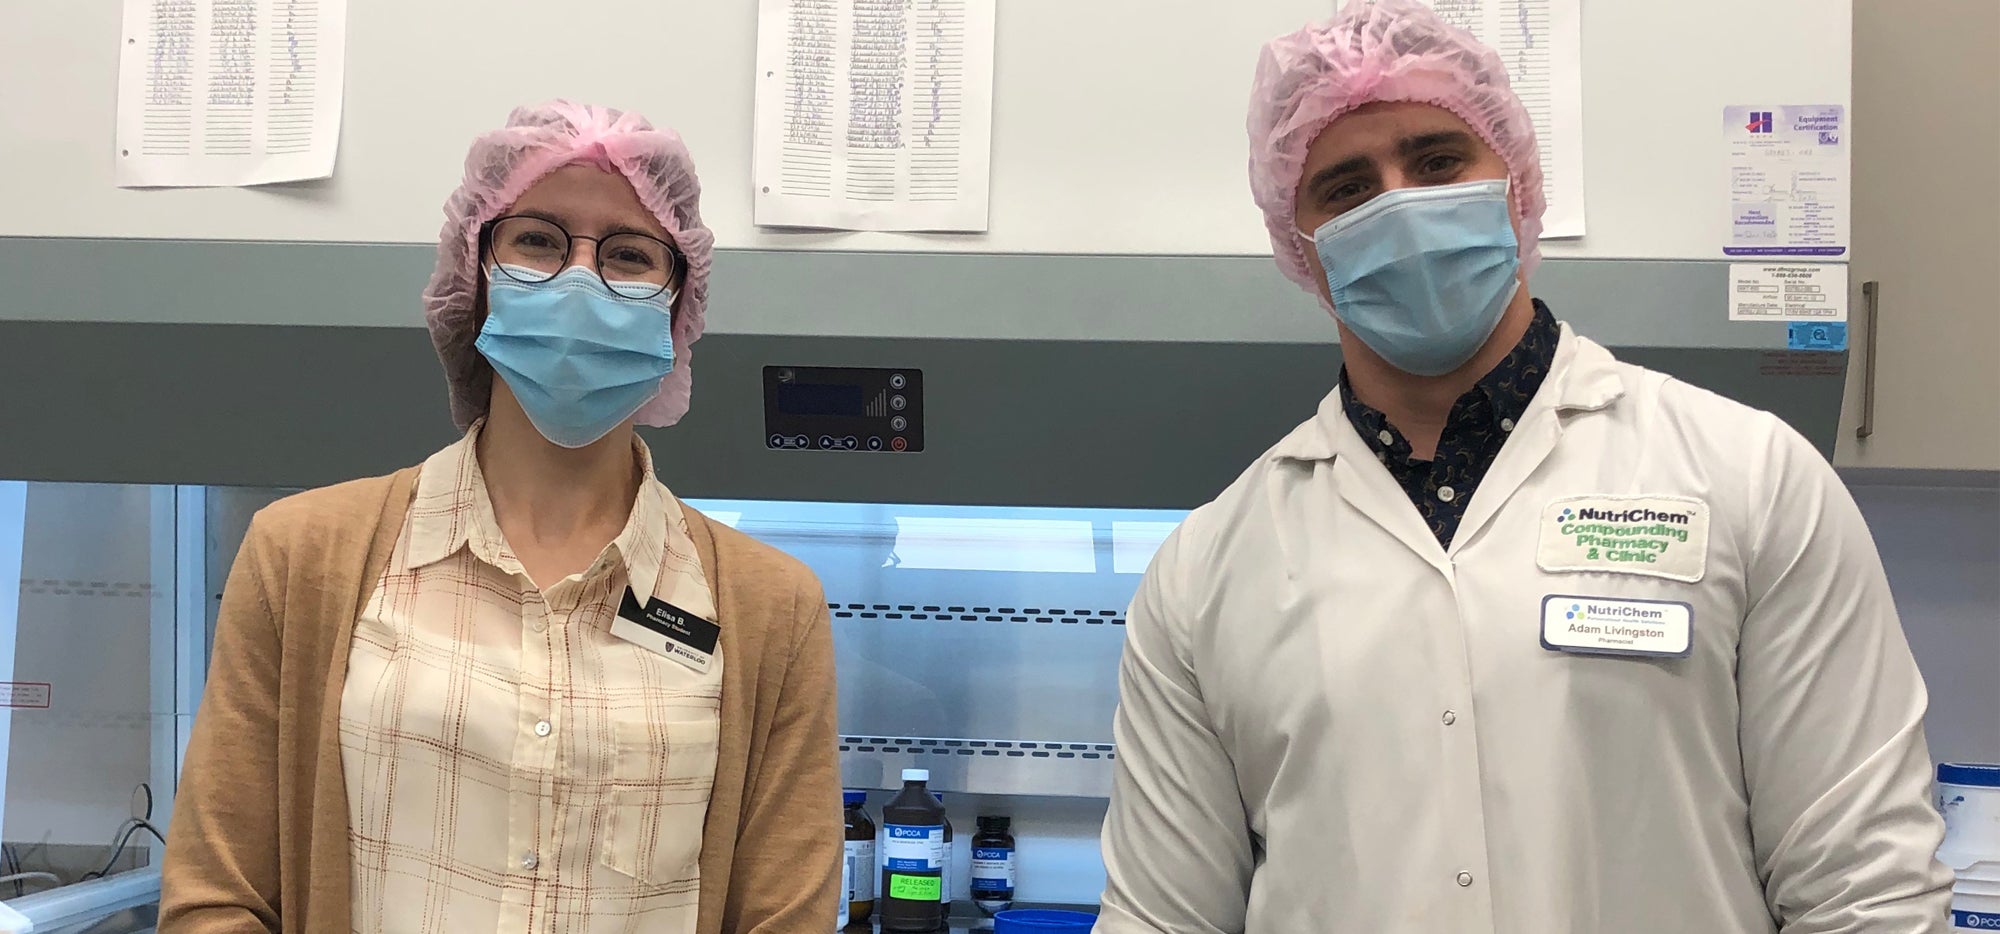 Elisa and Adam in the compounding lab wearing masks